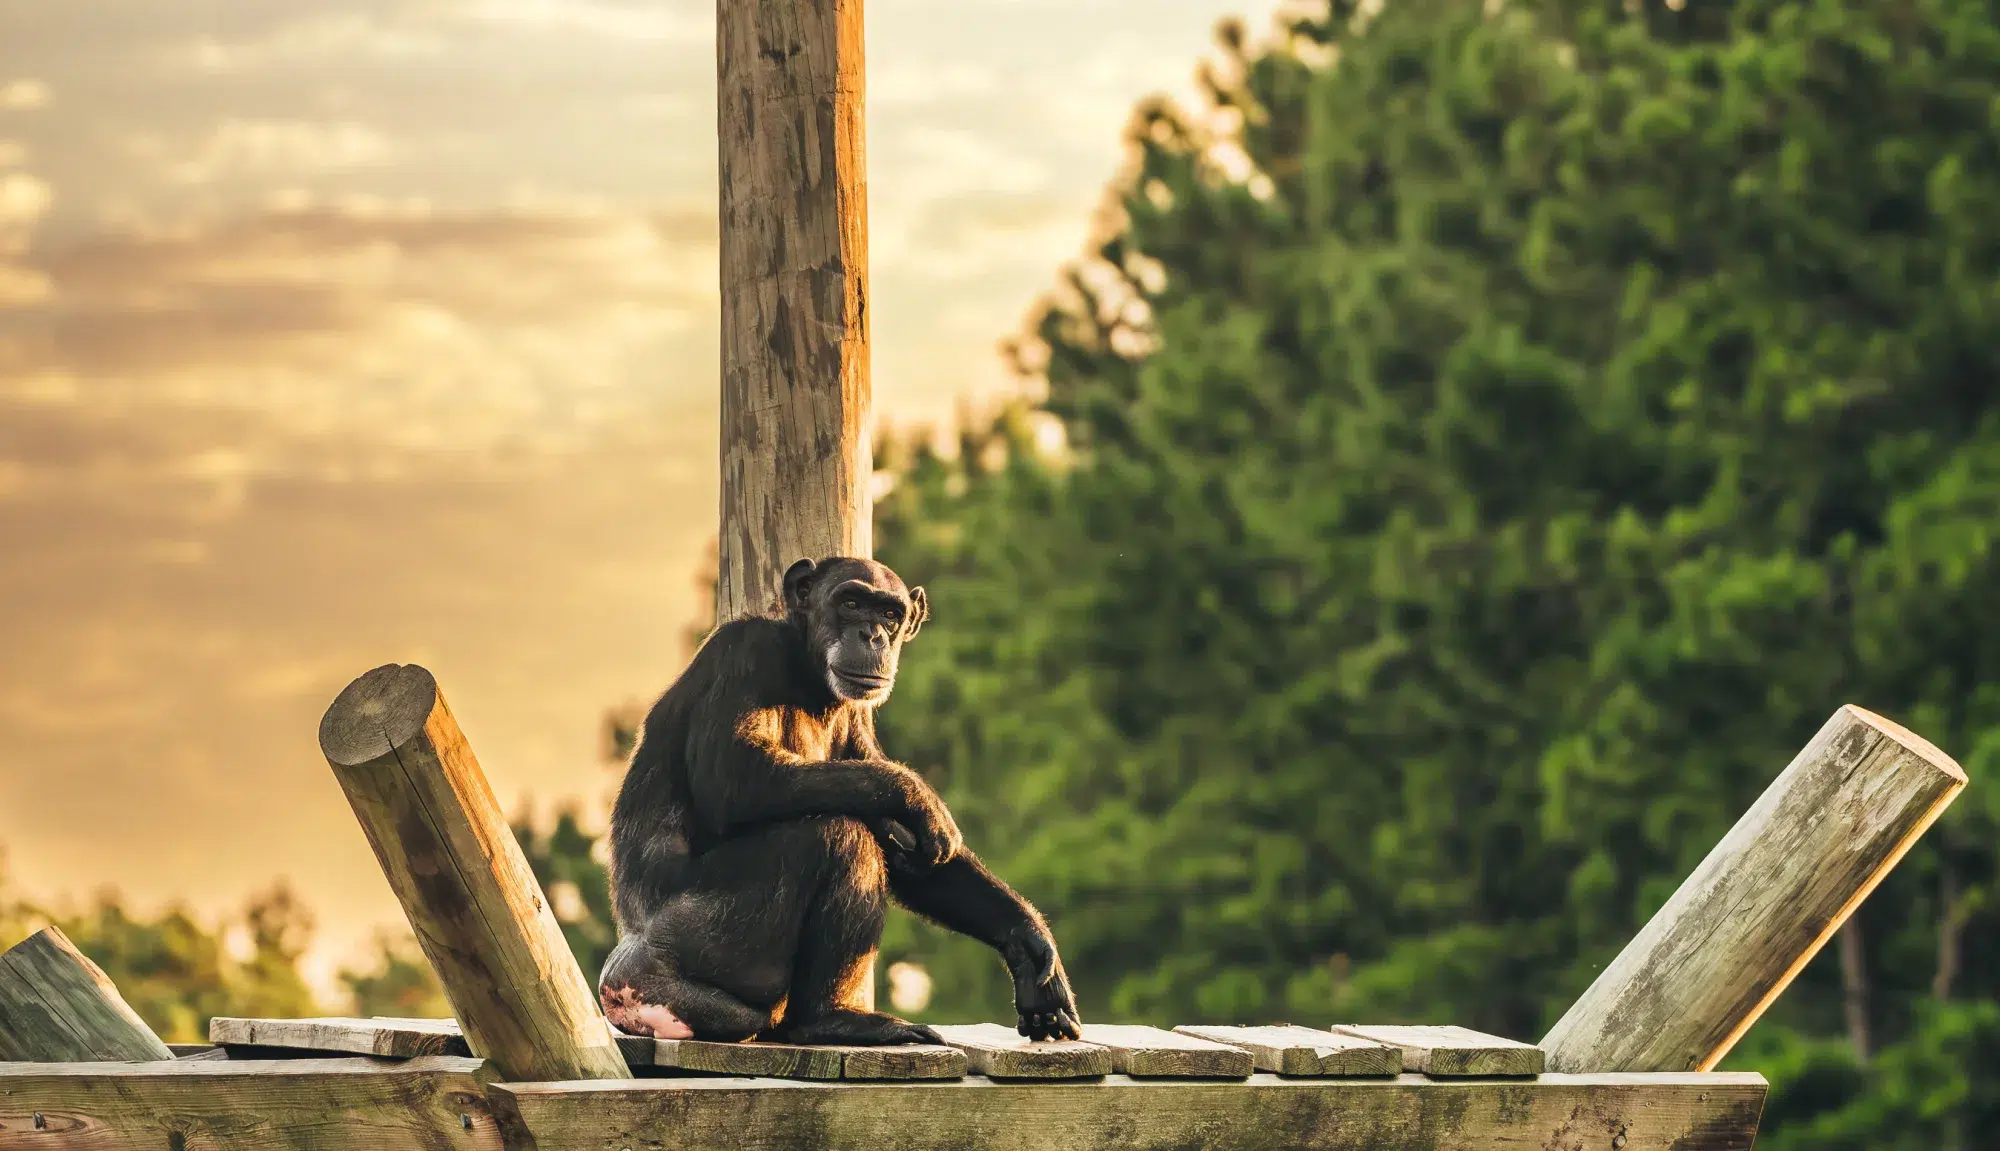 Chimp Background in Nature